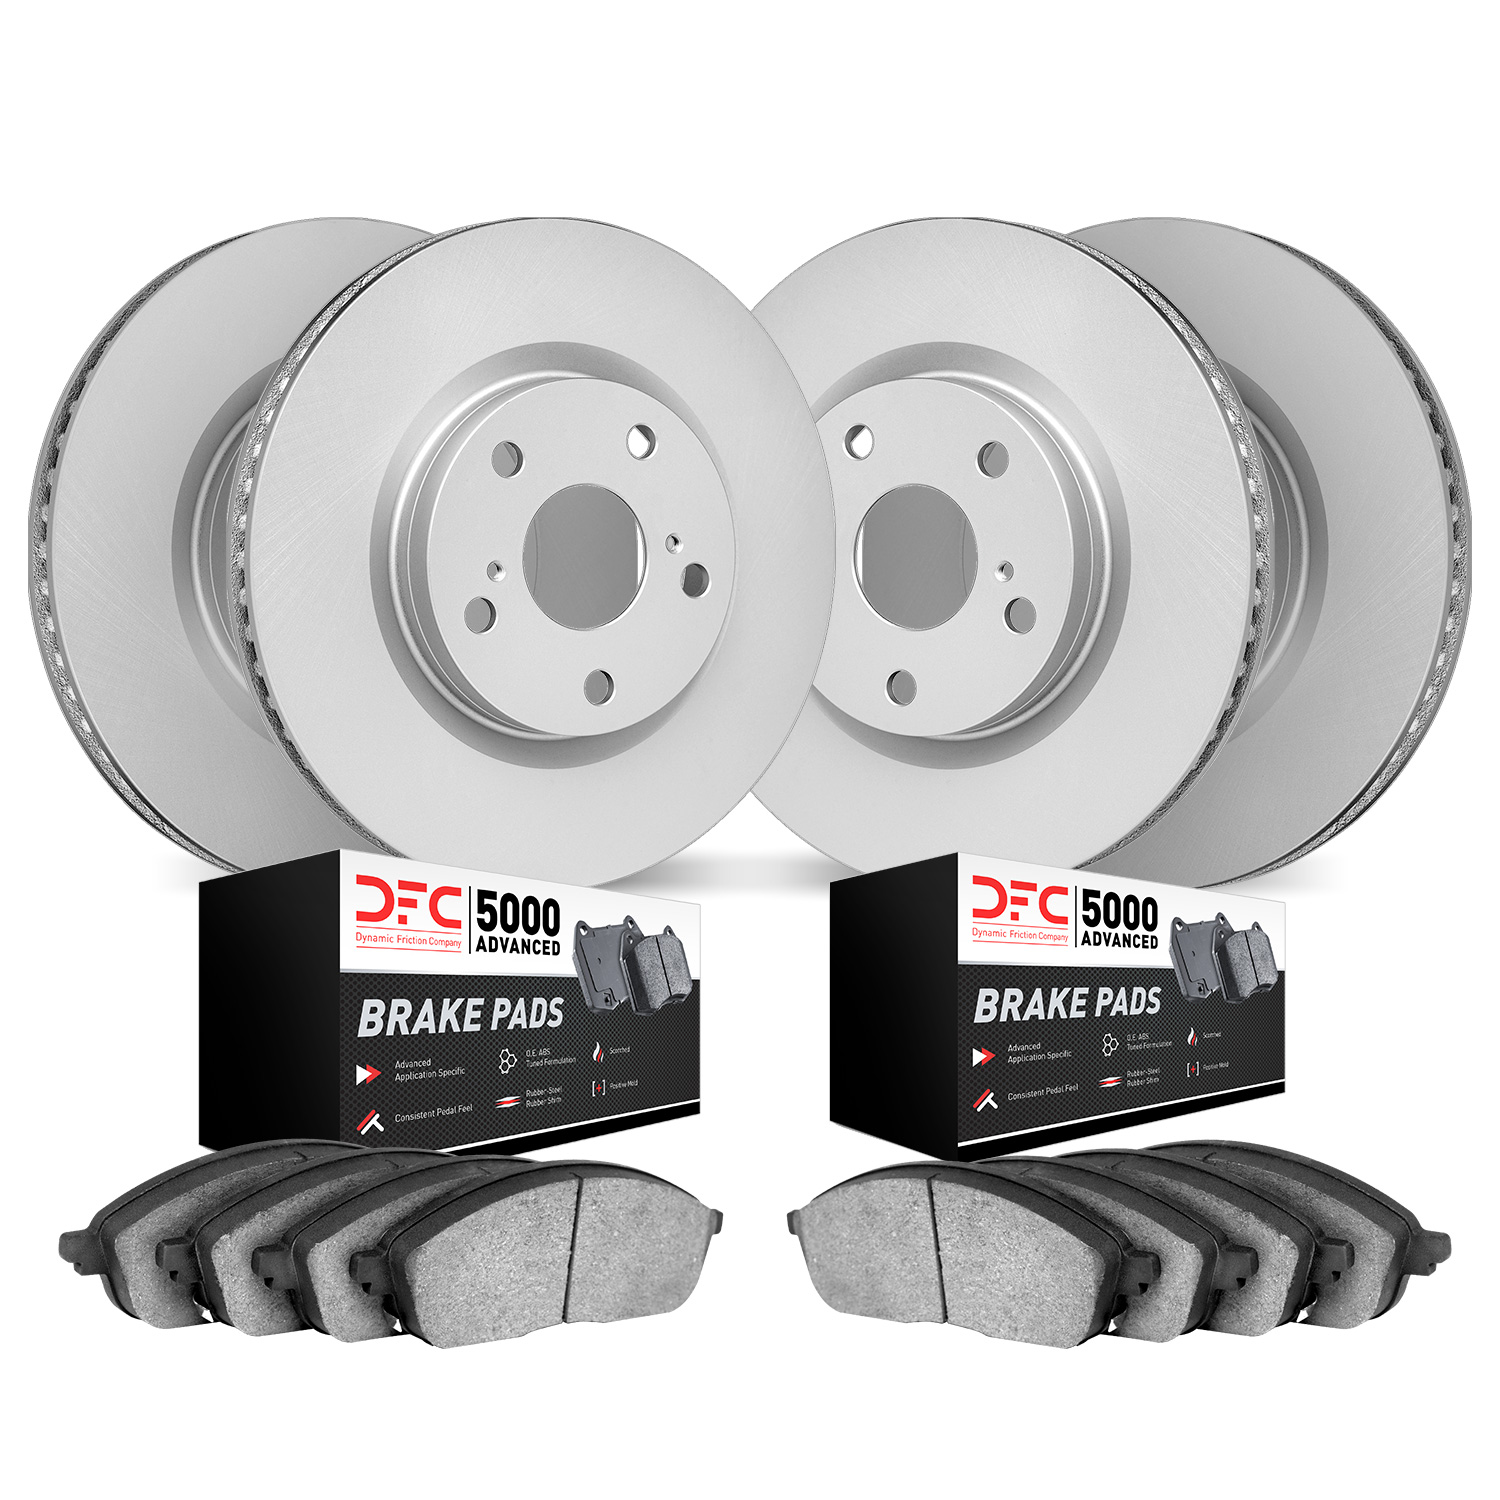 4504-65013 Geospec Brake Rotors w/5000 Advanced Brake Pads Kit, 2003-2011 GM, Position: Front and Rear